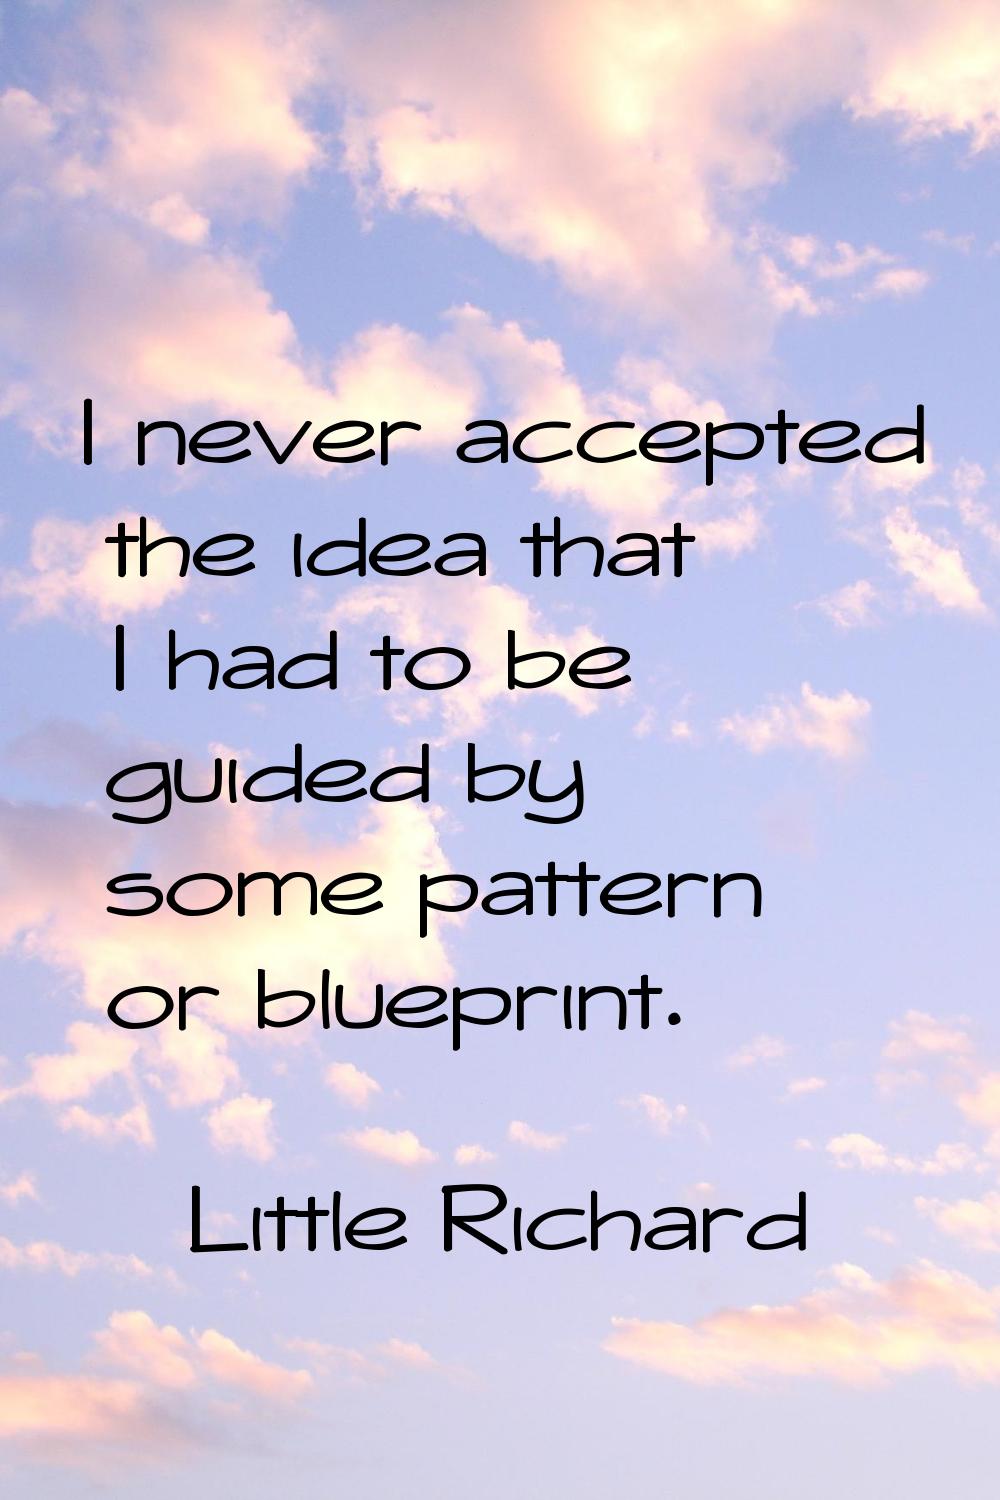 I never accepted the idea that I had to be guided by some pattern or blueprint.